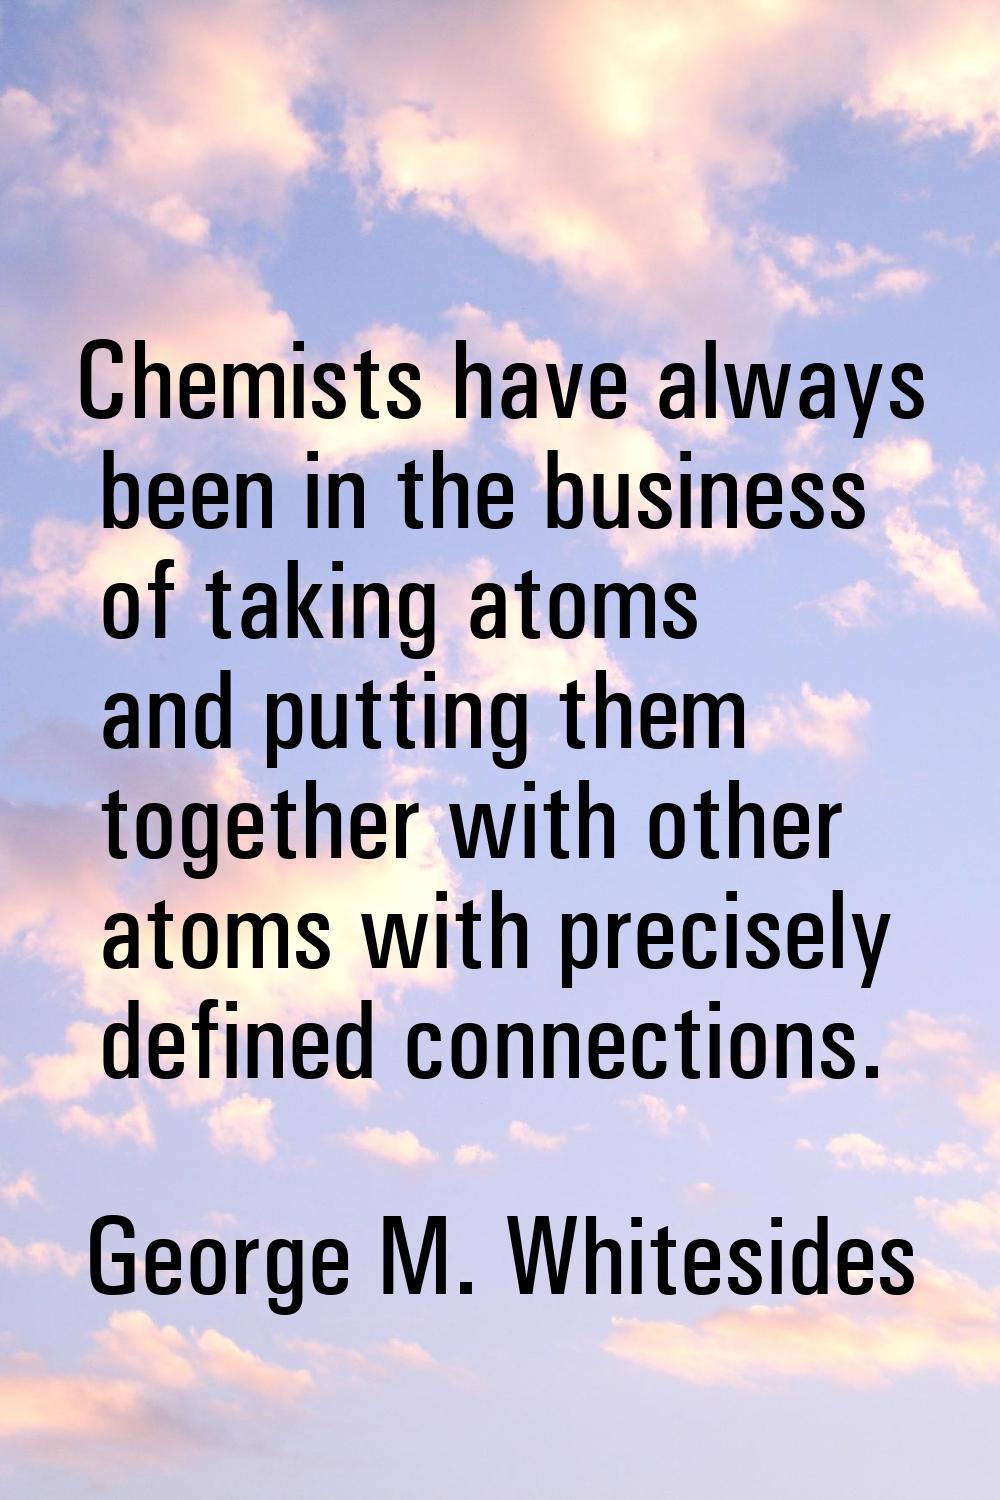 Chemists have always been in the business of taking atoms and putting them together with other atom